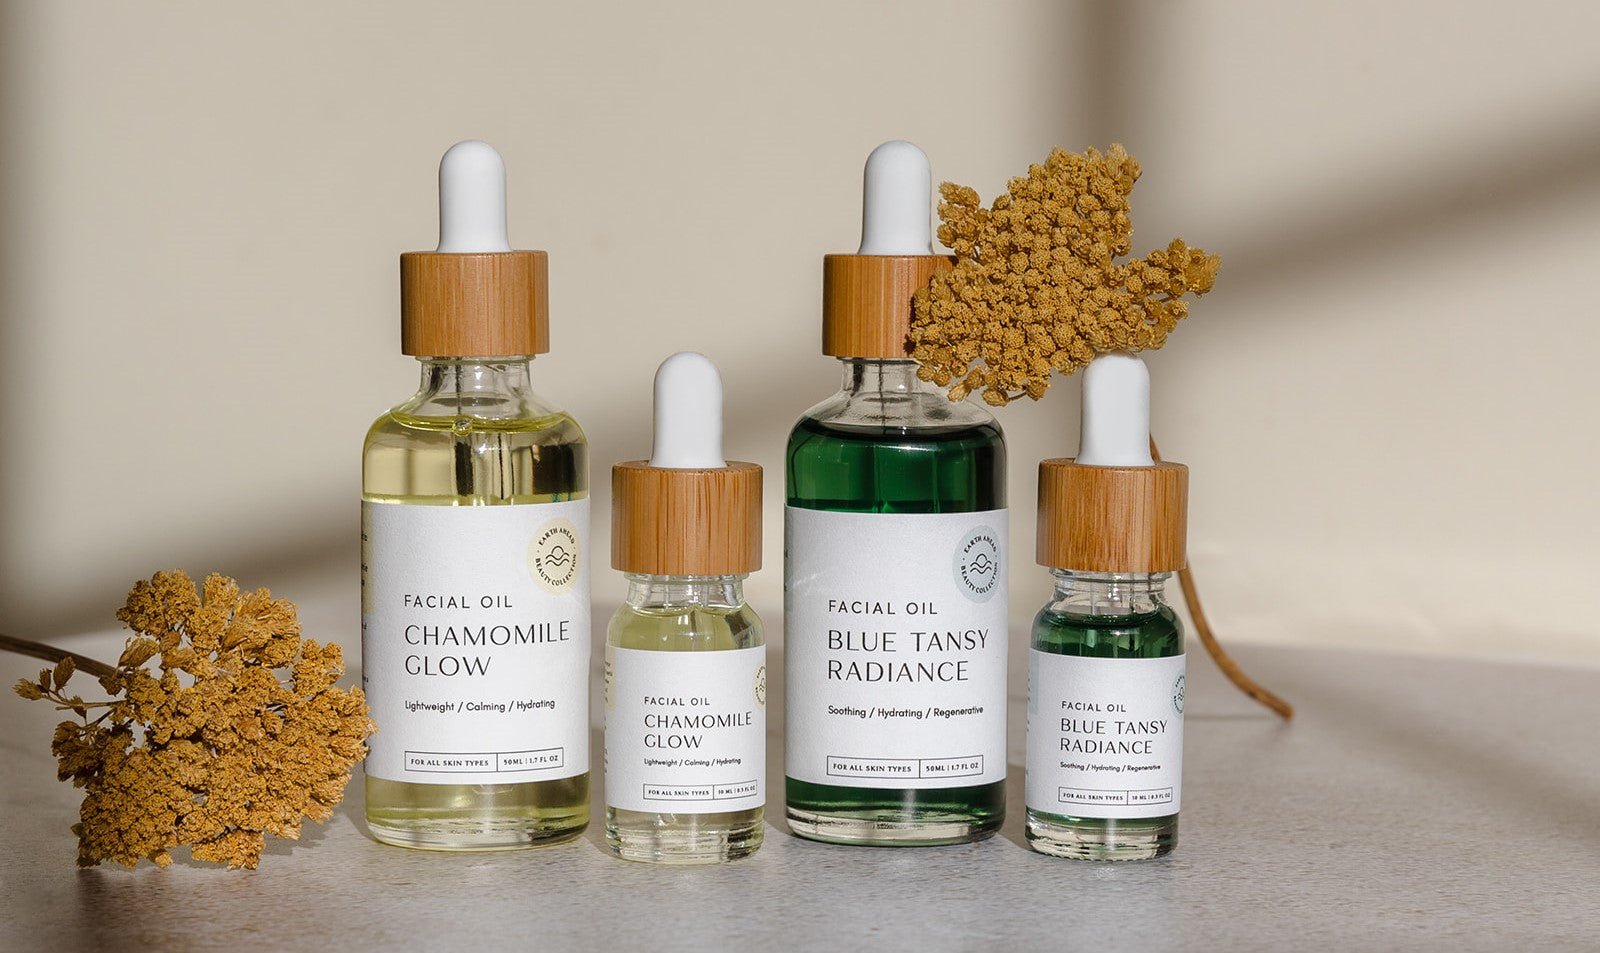 Earth Ahead Facial Oils: Blue Tansy Radiance and Chamomile Glow